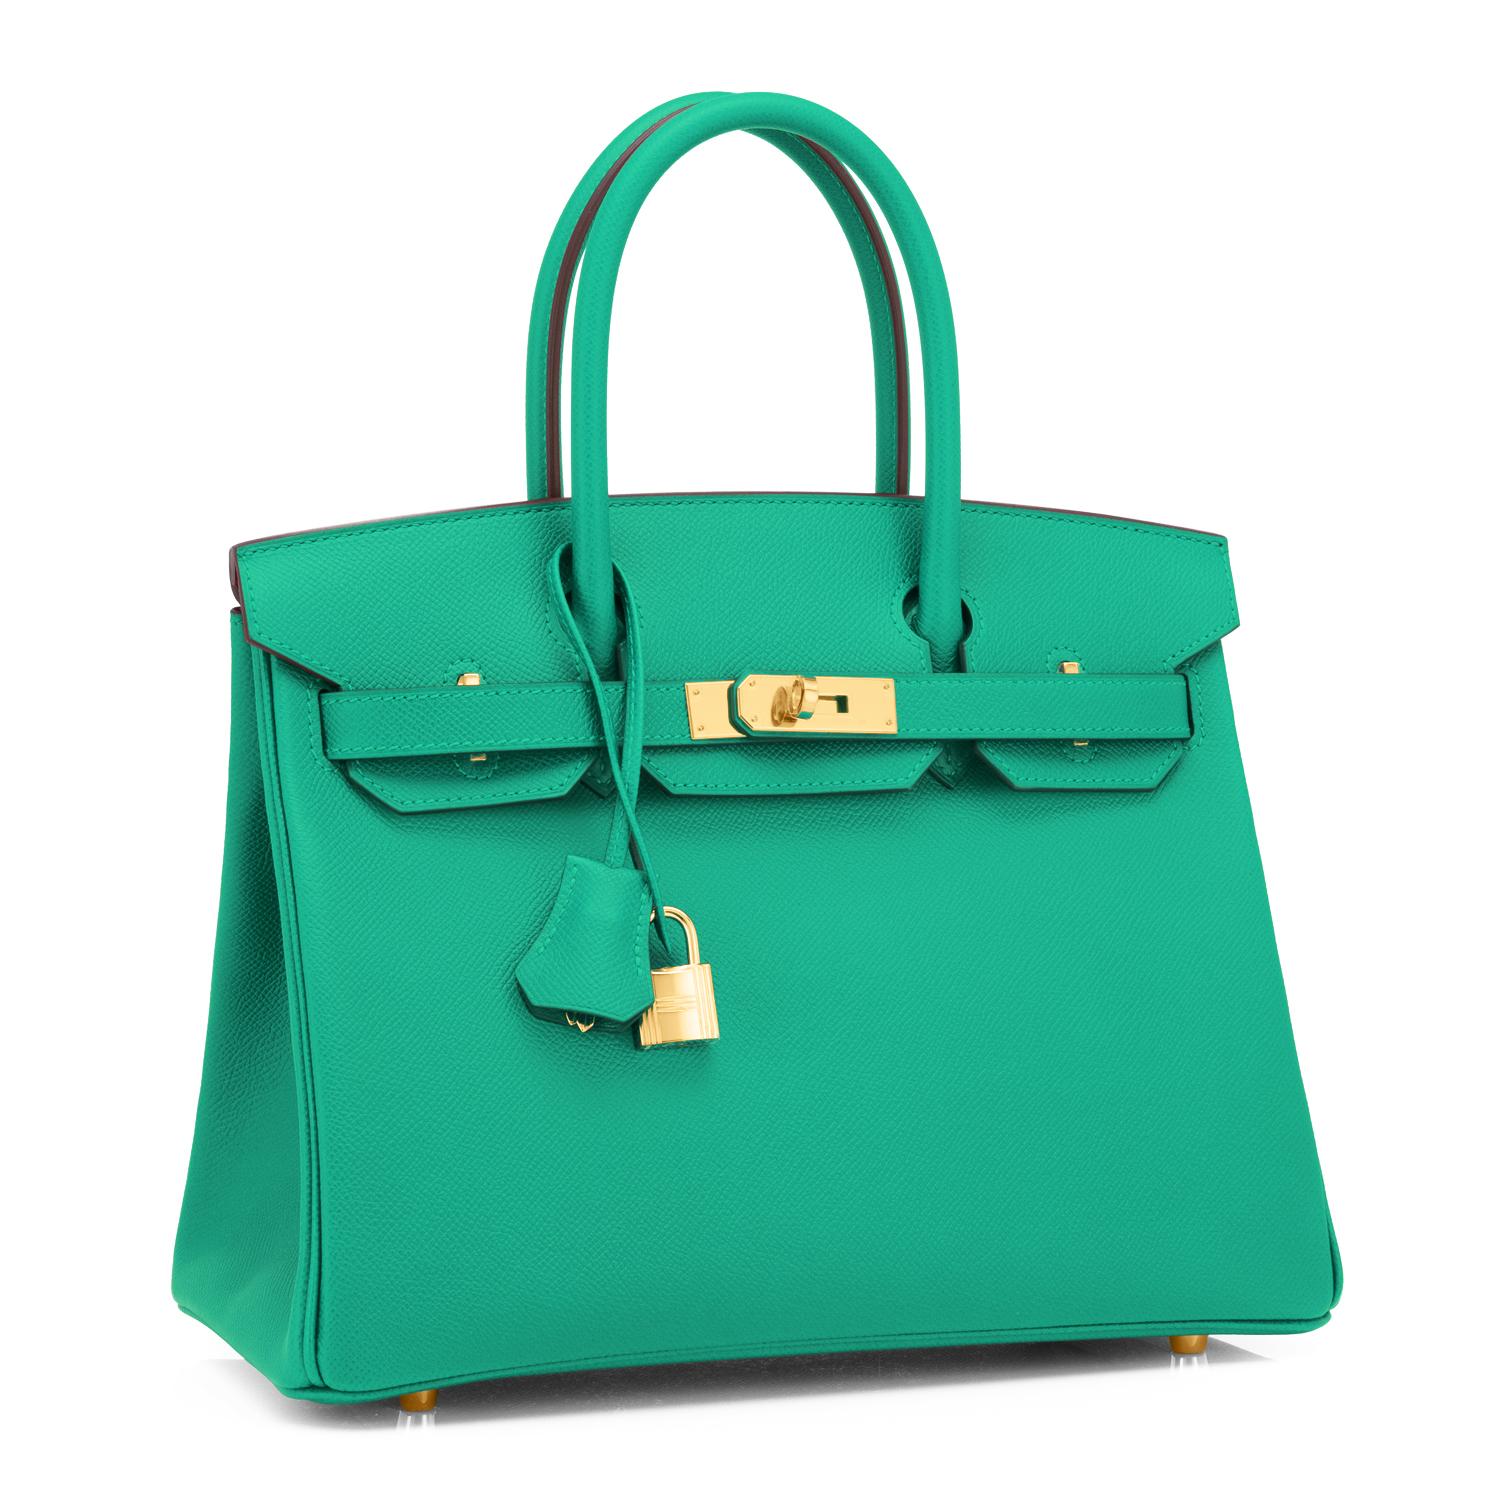 Hermes Birkin 30cm Vert Jade Birkin Green Epsom Gold Hardware Bag U Stamp, 2022
Just purchased from Hermes store! Bag bears new interior 2022 U Stamp.
Brand New in Box. Store fresh. Pristine condition (with plastic on hardware).
Perfect gift! Coming